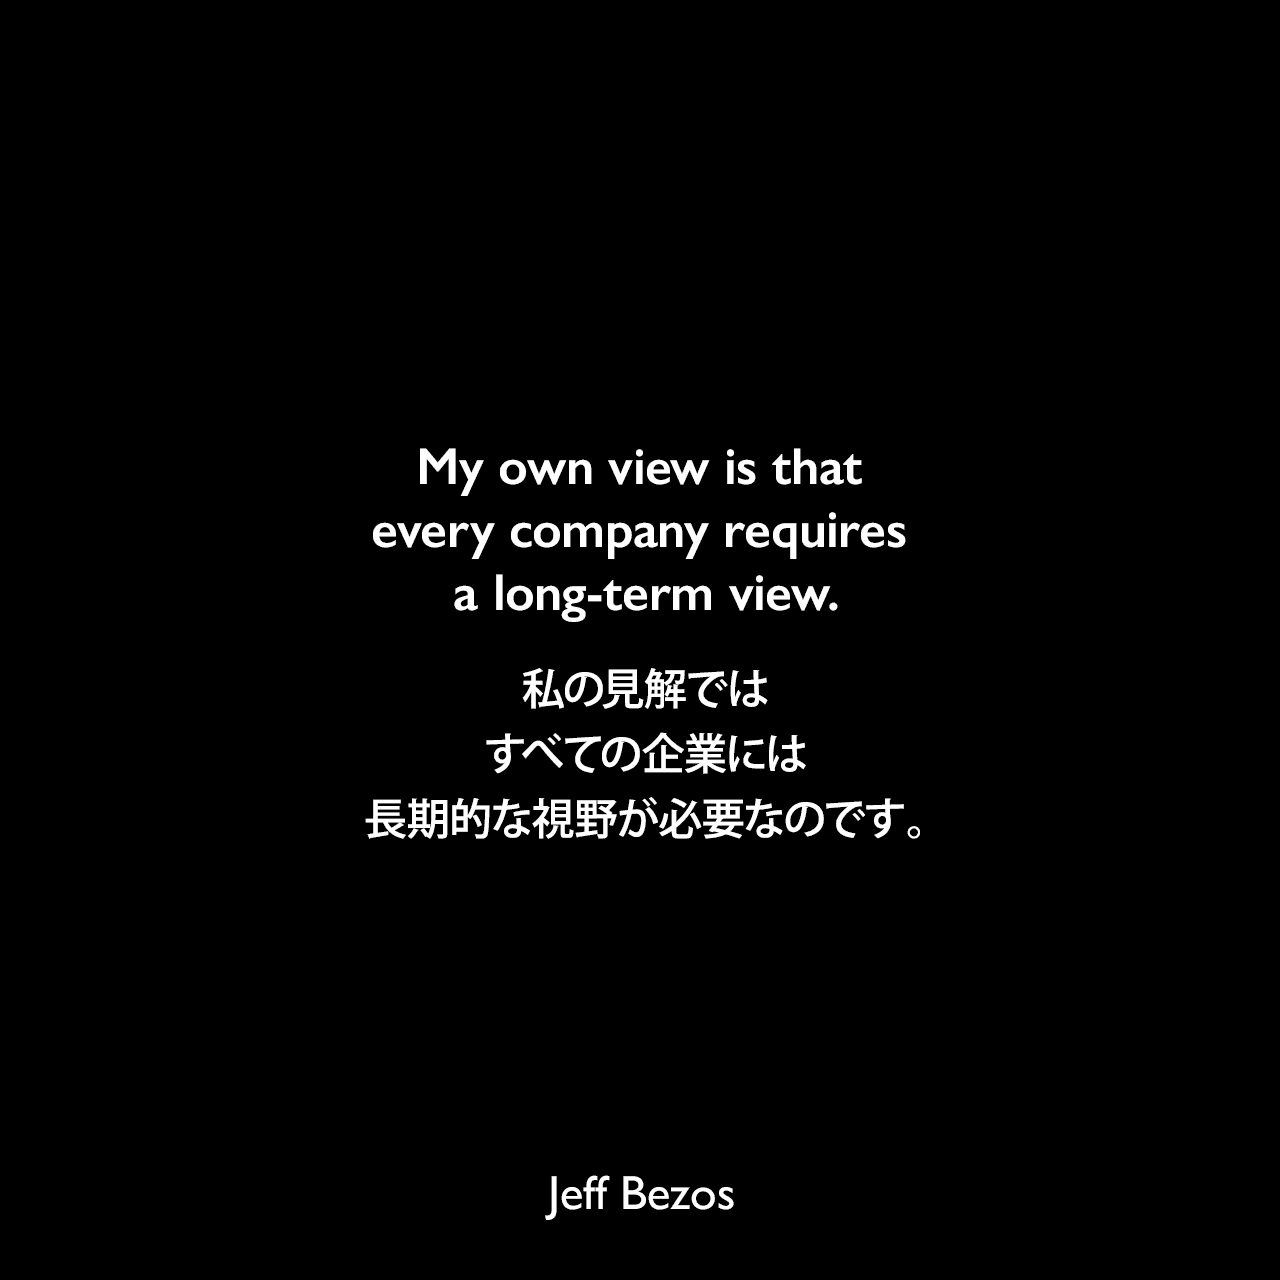 My own view is that every company requires a long-term view.私の見解では、すべての企業には長期的な視野が必要なのです。Jeff Bezos